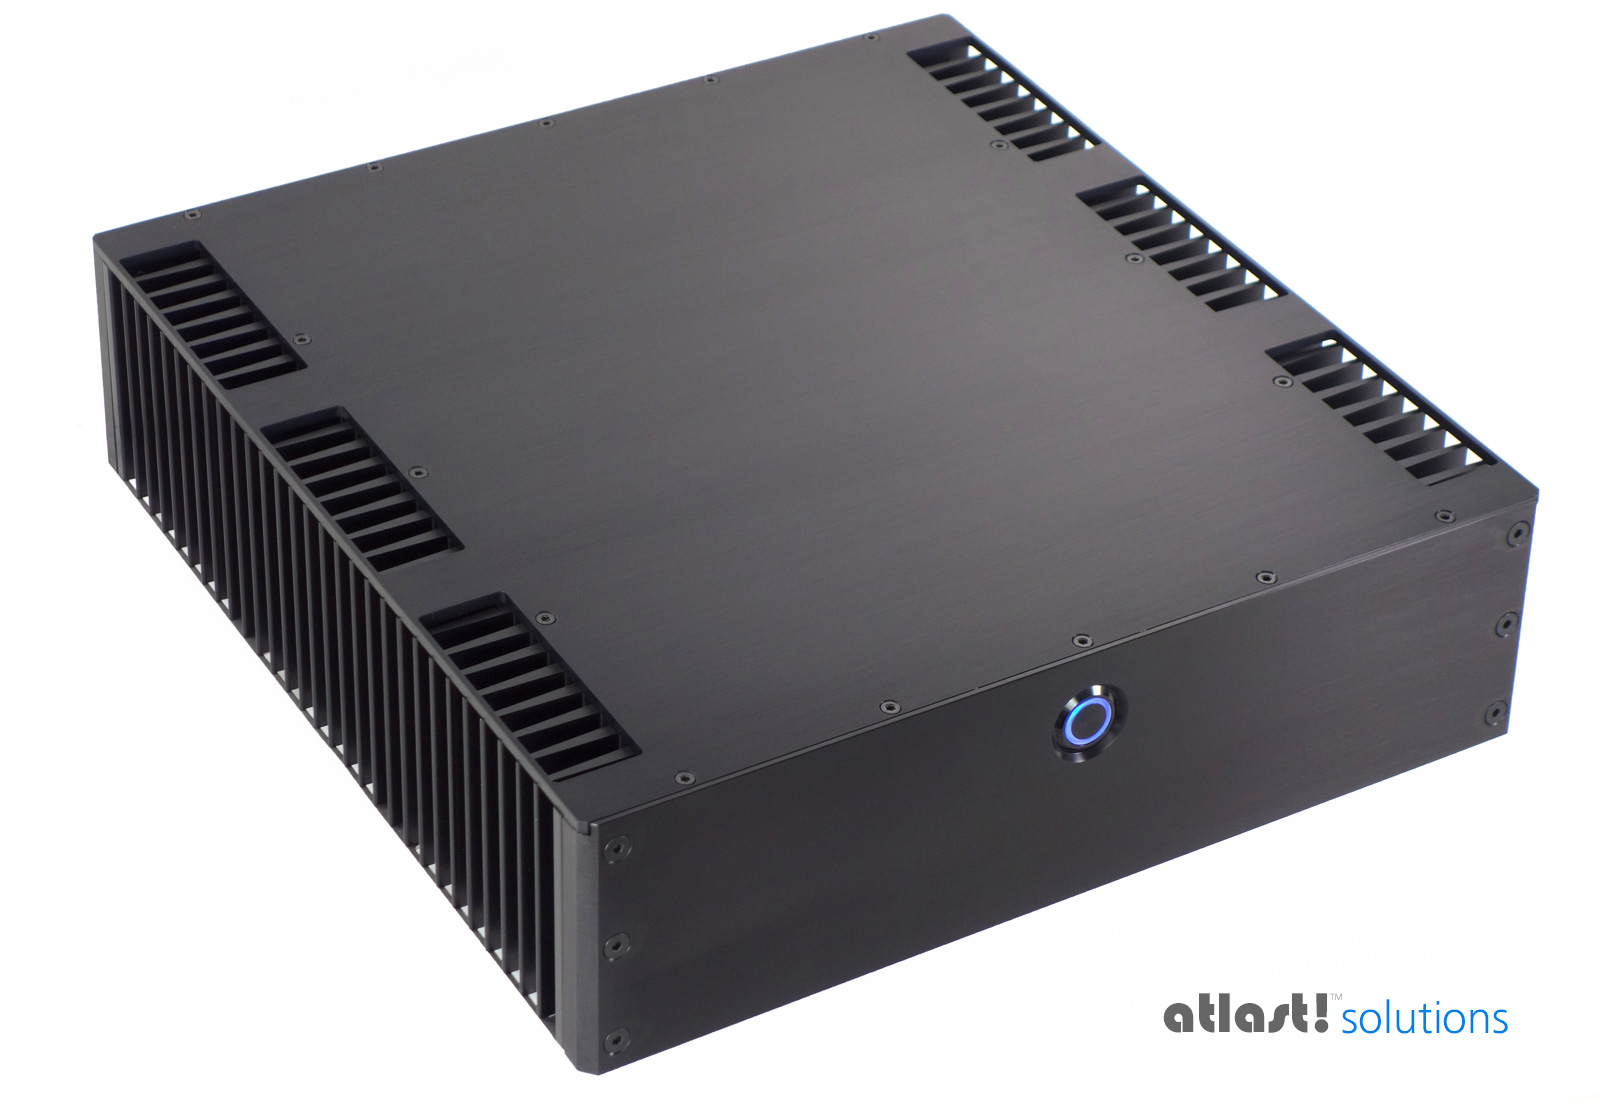 Sigao fanless silent 13th Gen i9 13900T PC, heatpipe cooling